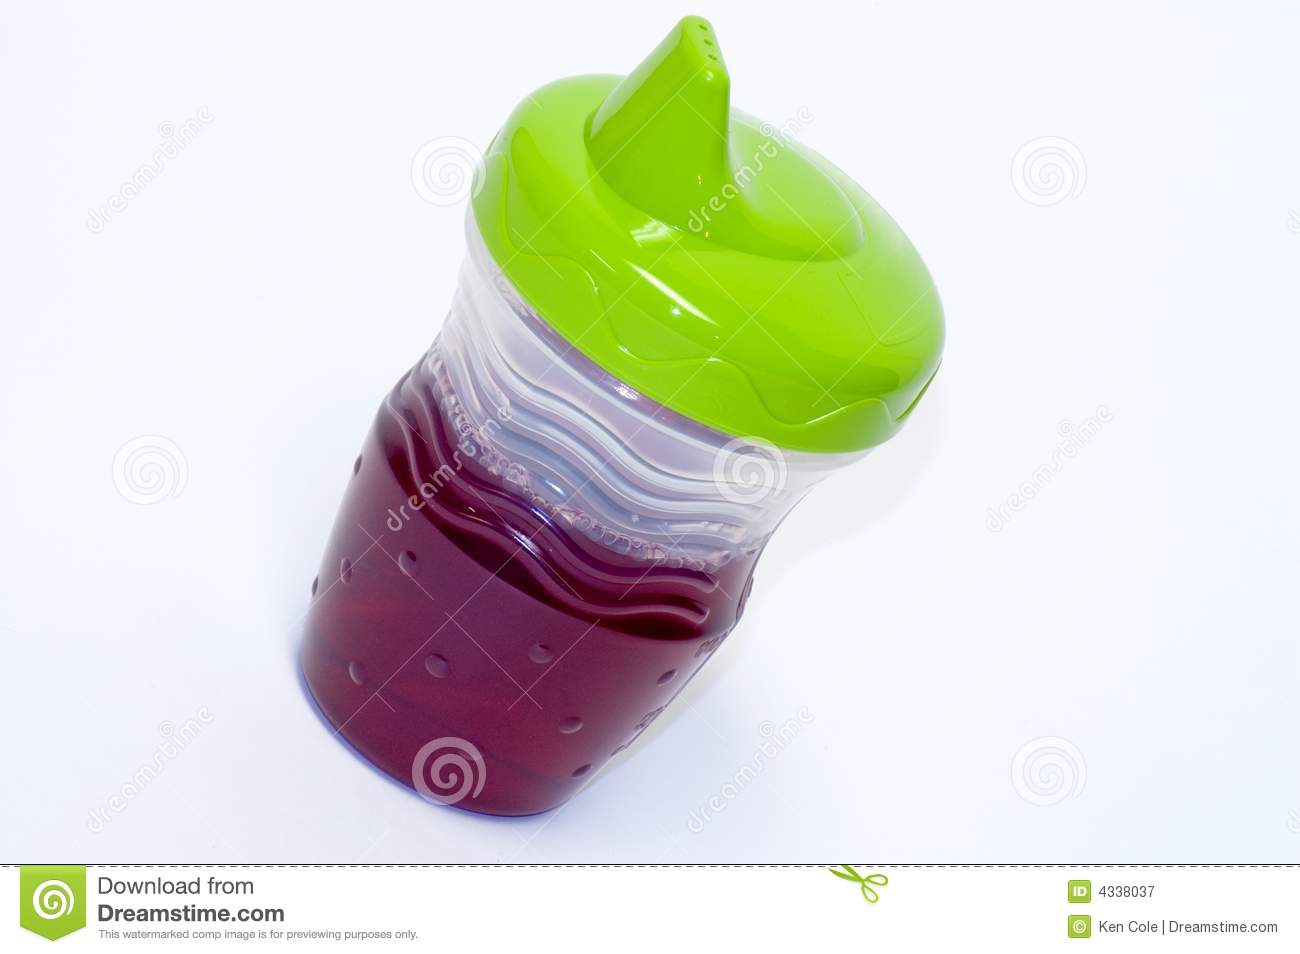 sippy cup clip art free - photo #9